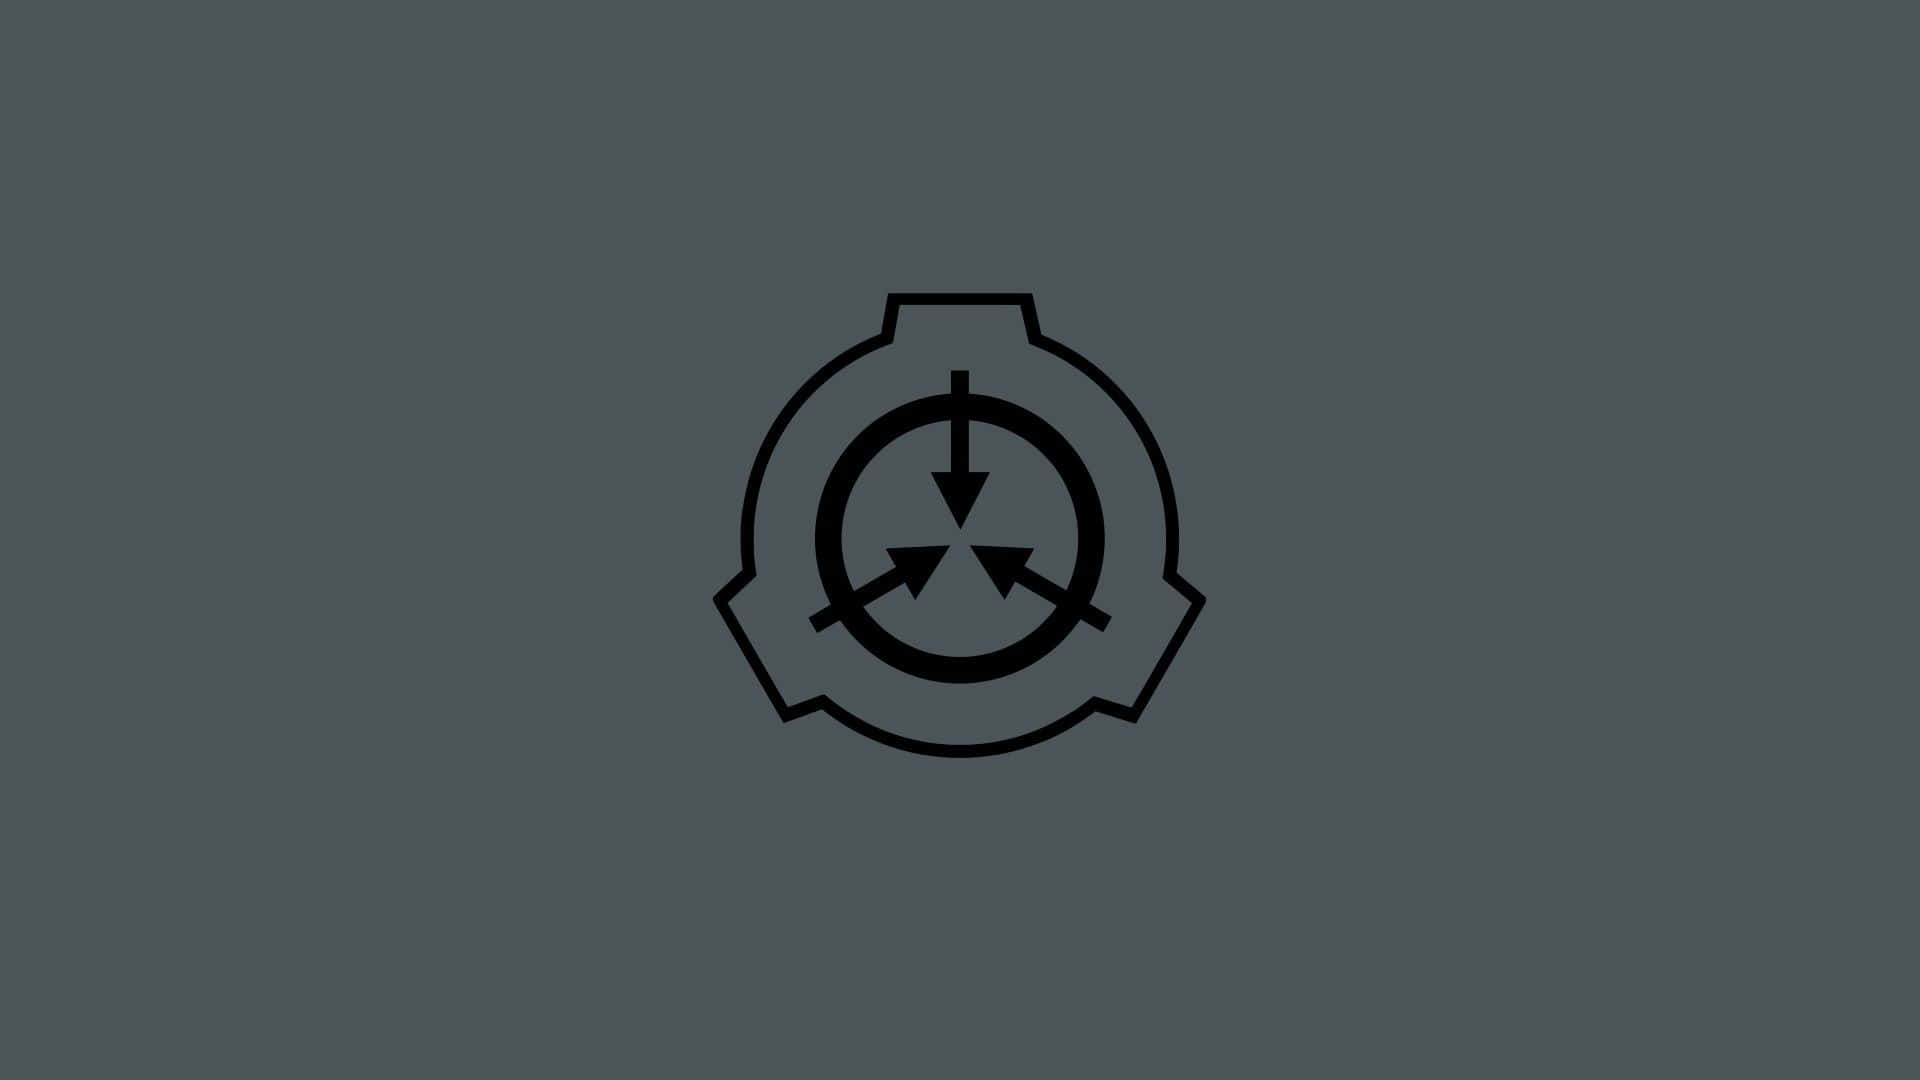 100+] Scp Wallpapers